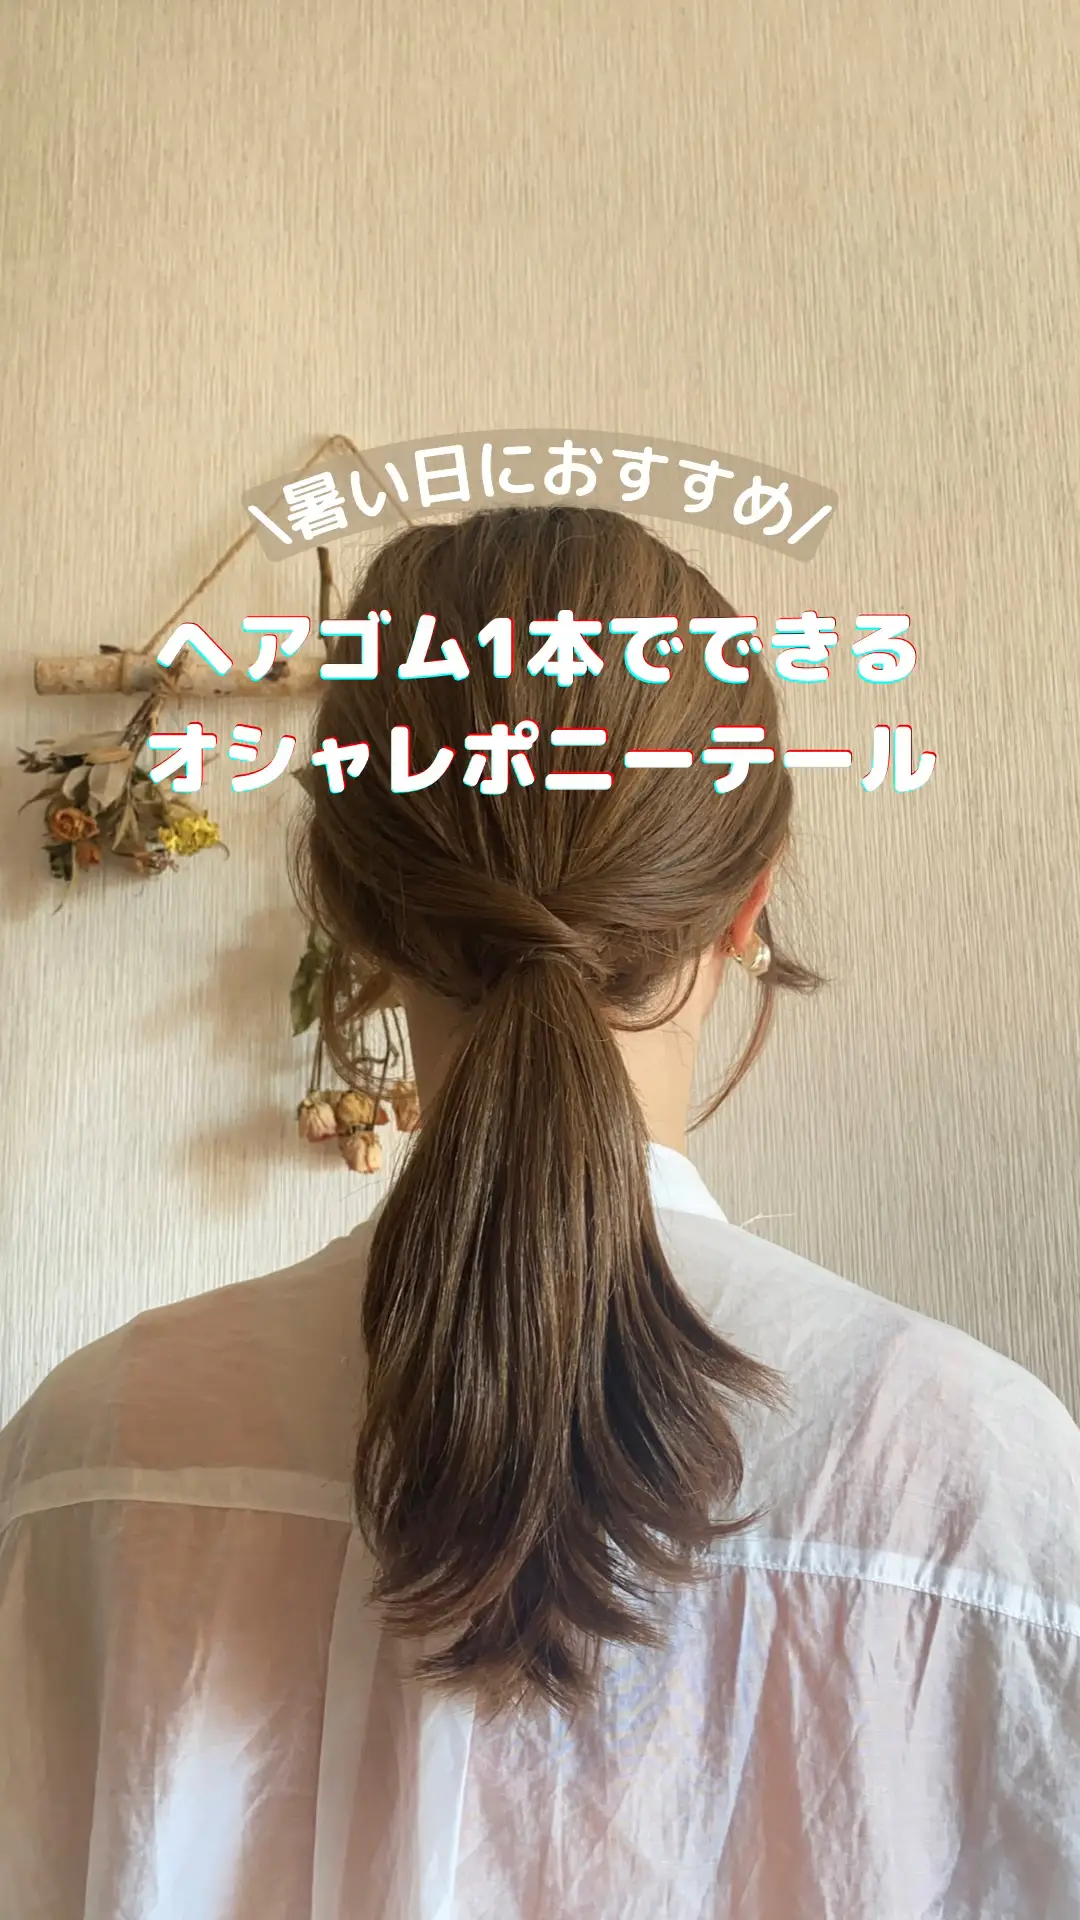 \ Recommended for hot days / Fashionable ponytail with one hair tie